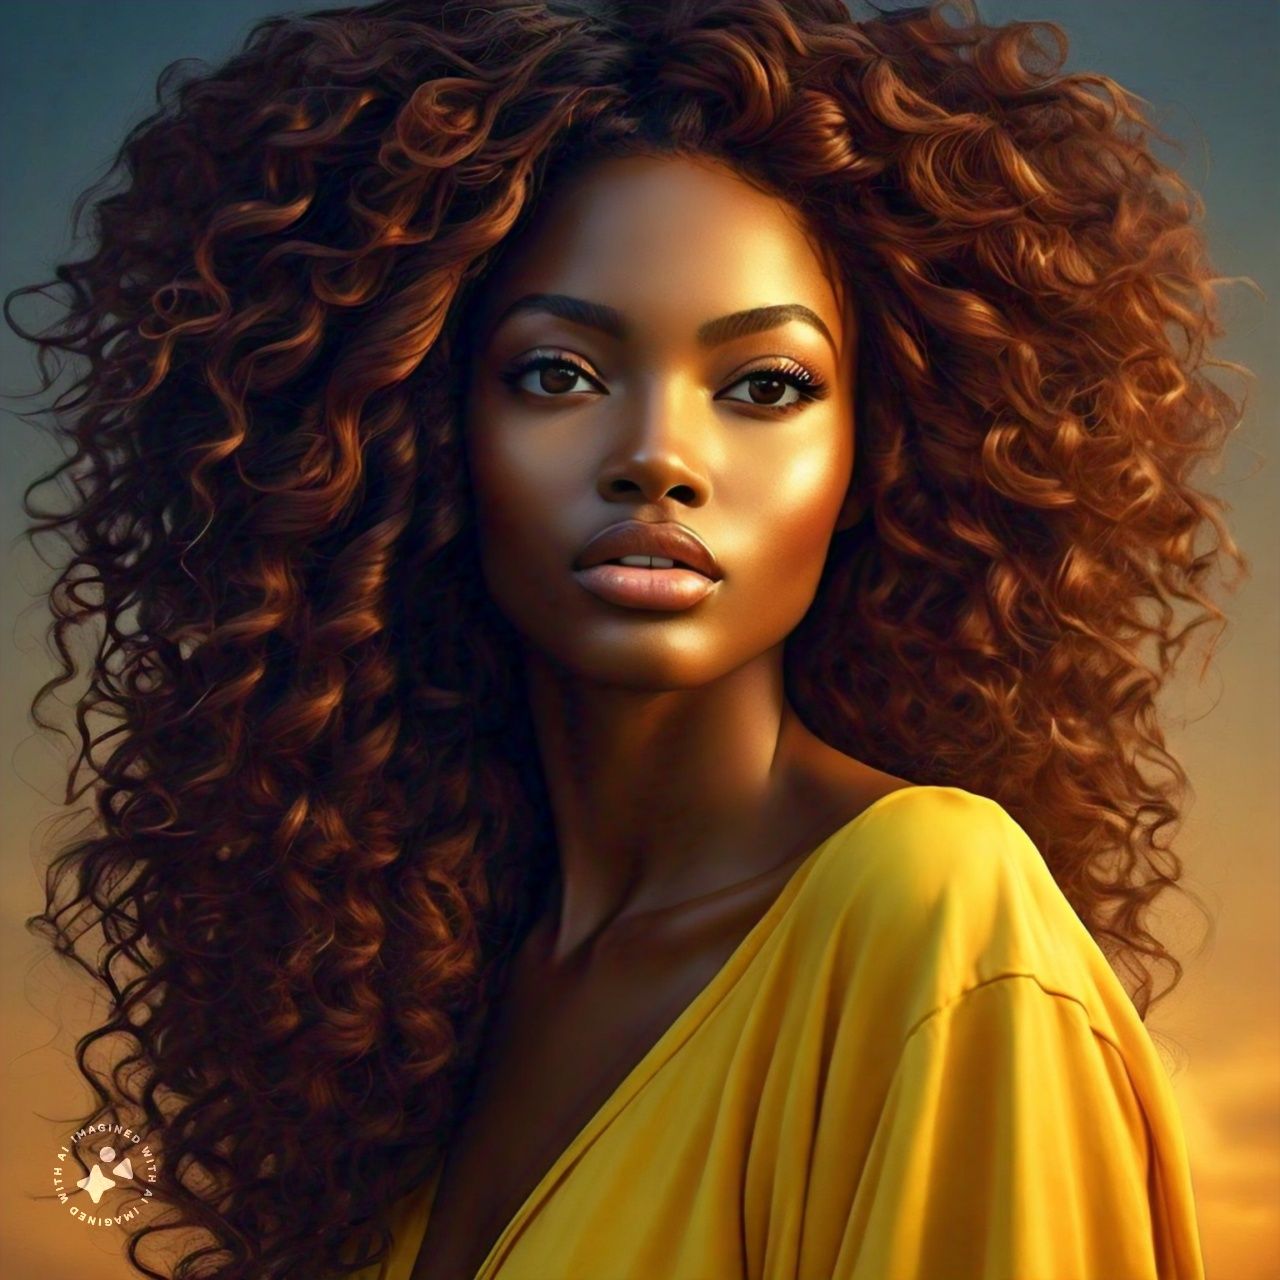 Weave Hairstyles for African Women